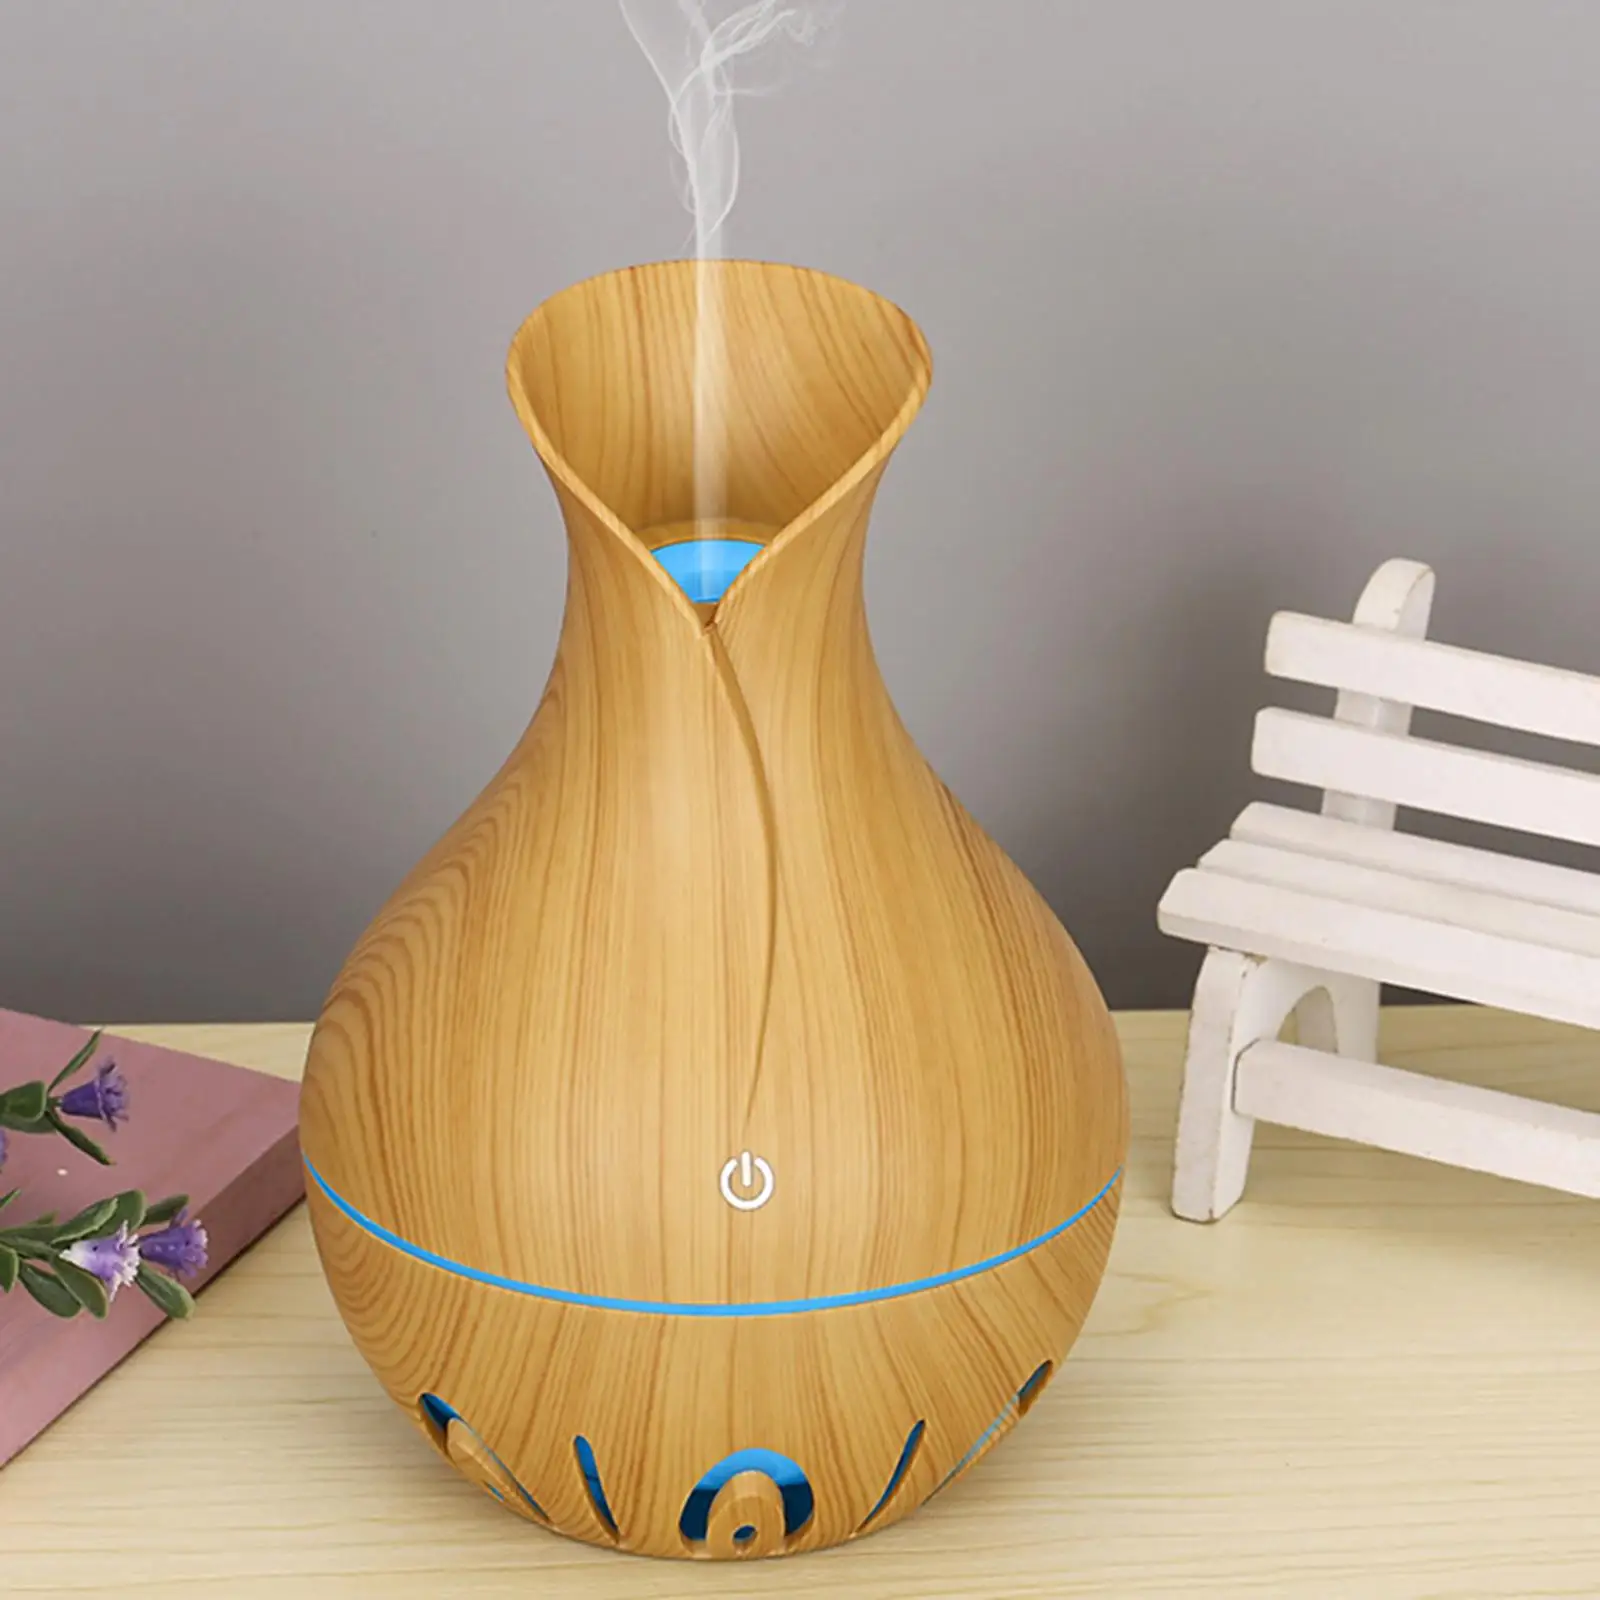 Essential Oil Diffuser Ultrasonic 7 Colors Wood Grain Super Quiet Purifier USB Aroma Diffuser for Gifts Baby Bedroom Bedroom Car